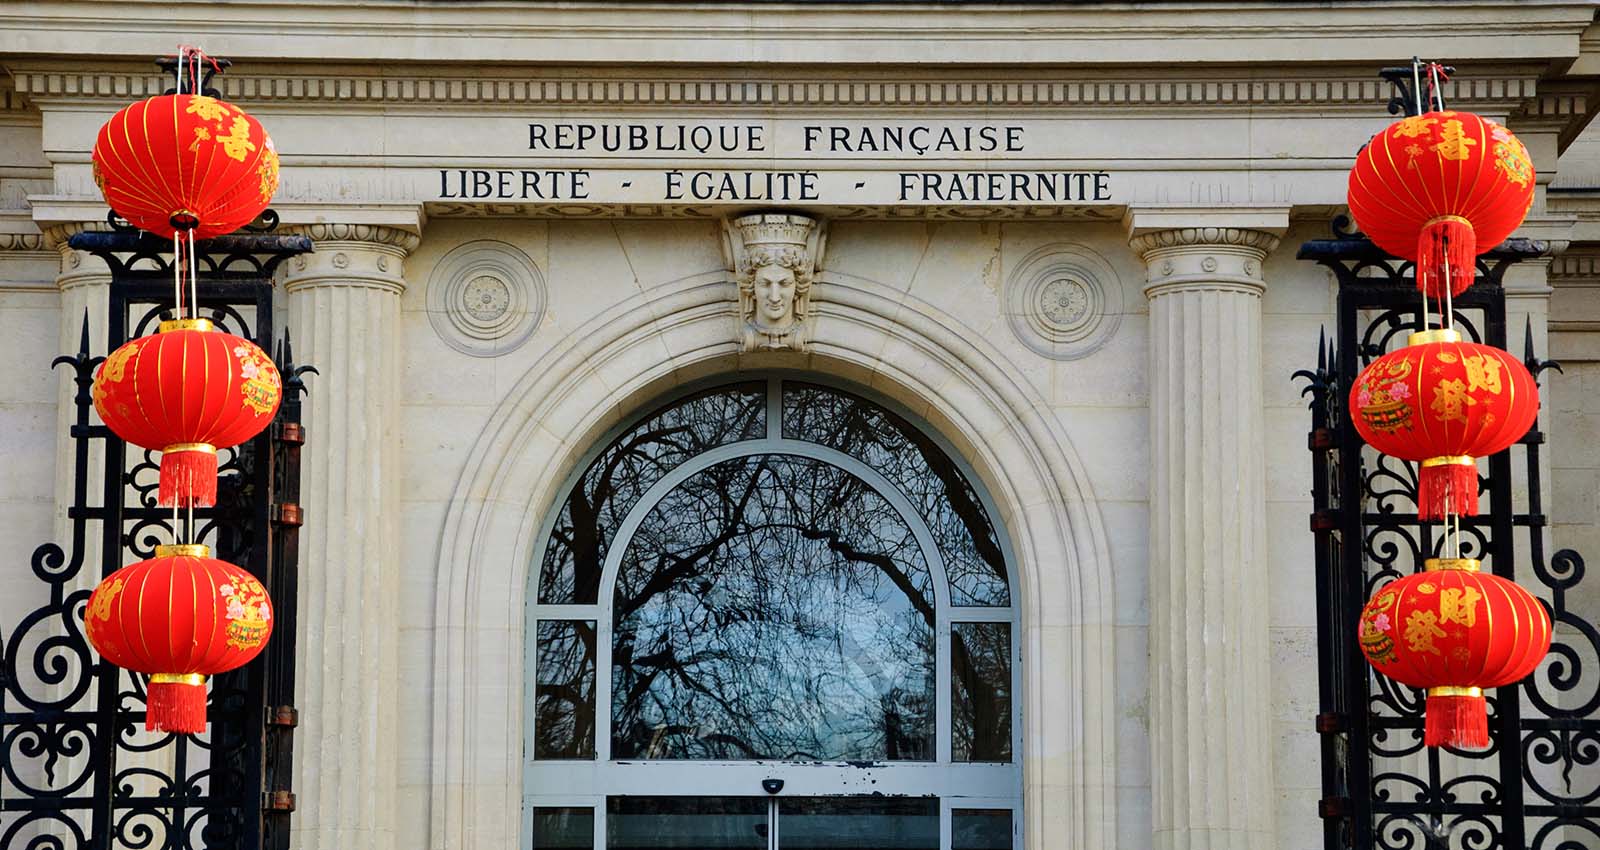 red lanterns hang infront of a french building with the words 'Liberte, egalite, fraternite' 